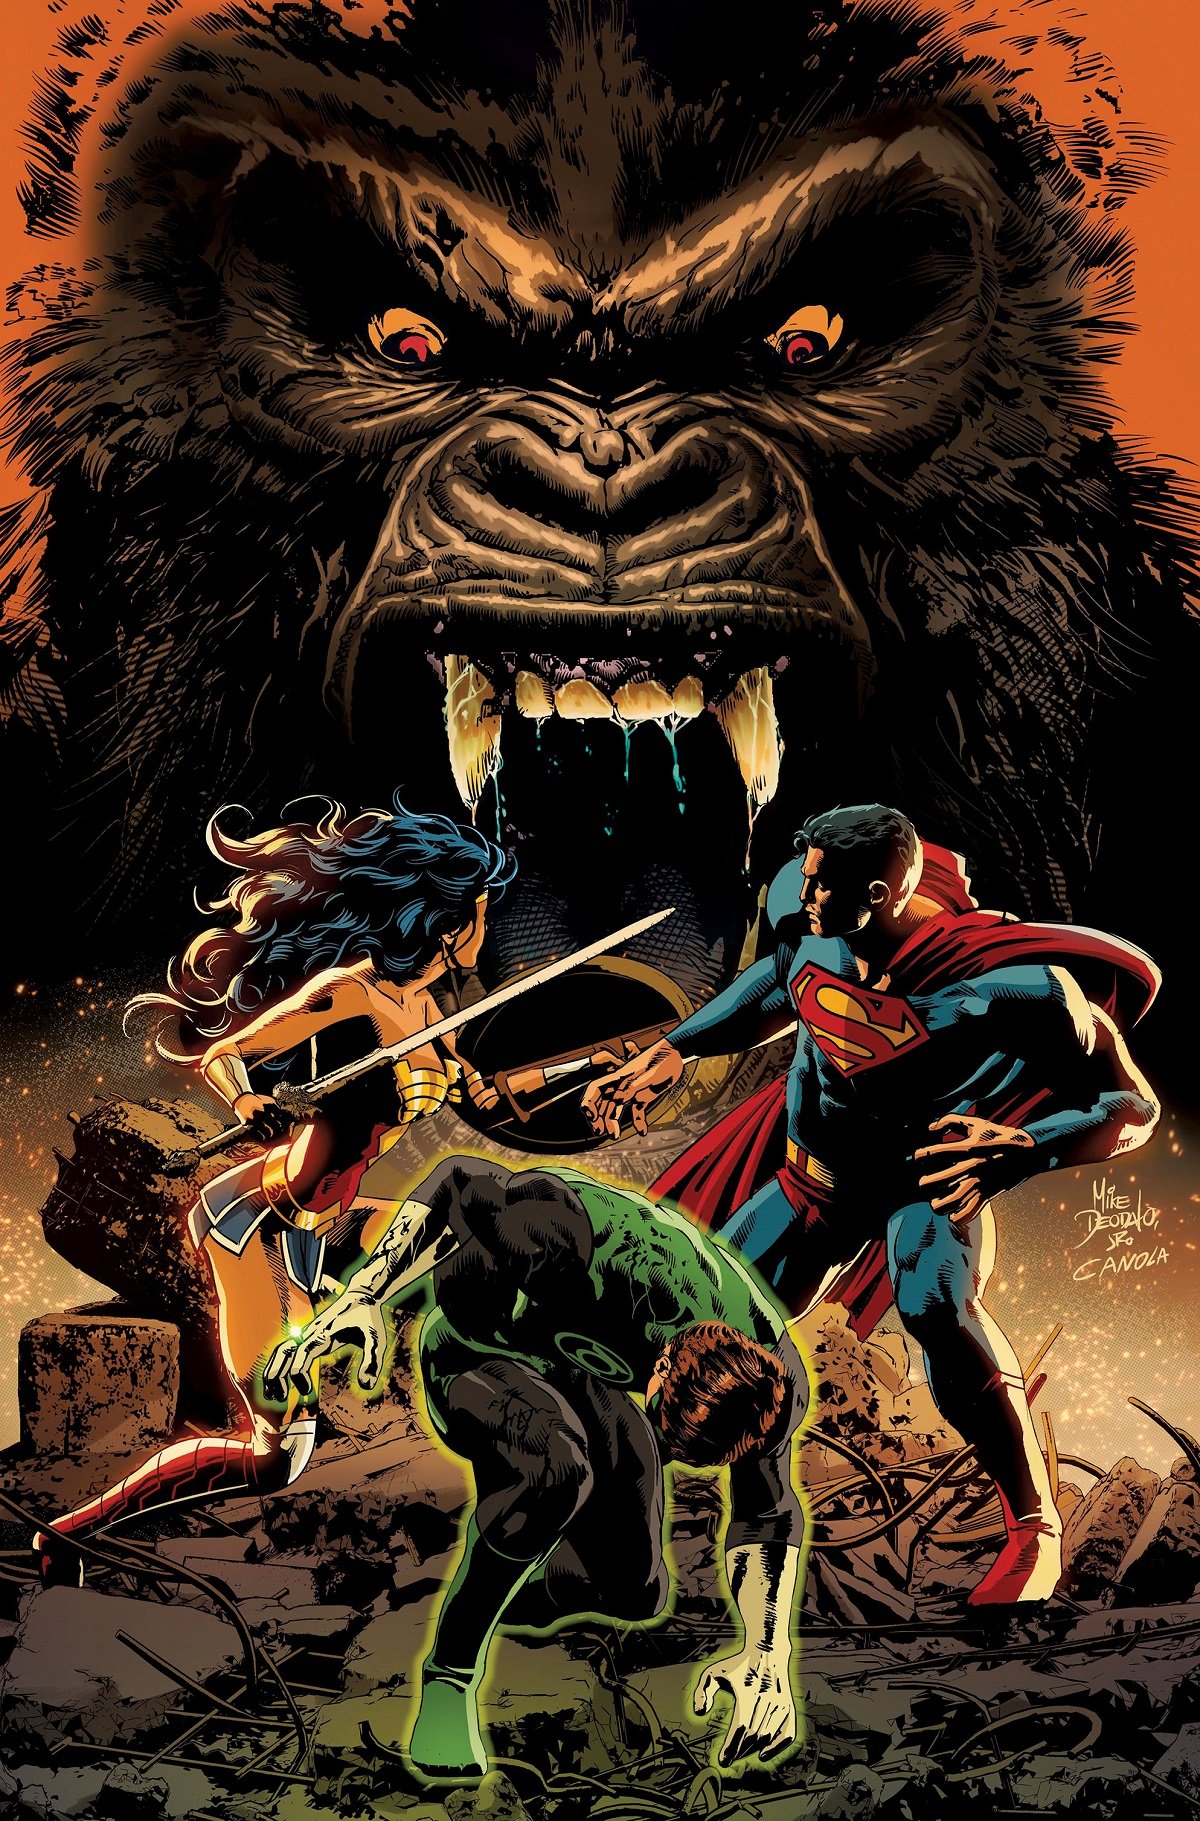 Wonder Woman, Superman, and Green Lantern take on Kong, in the third issue variant cover for Justice League vs. Godzilla vs. Kong, by Mike Deodato Jr.